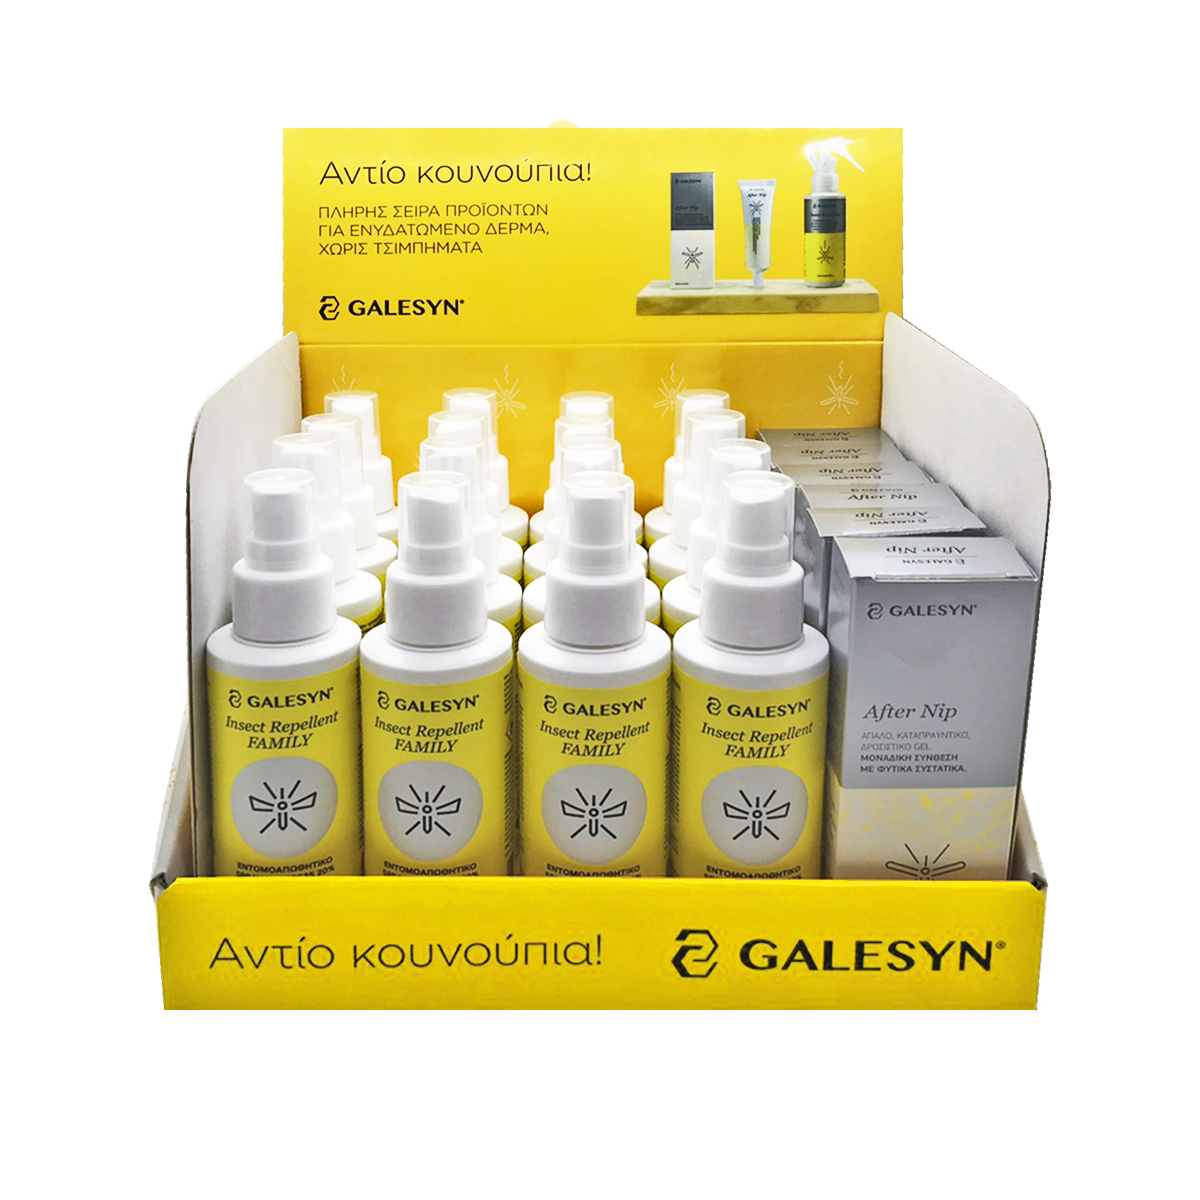 Galesyn Stand Αντικουνουπικών (περ. 16τμχ Insect Repellent Family IR3535 με Χ.Τ.:6,54€ &amp; 6τμχ After Nip με Χ.Τ.:4,80€)